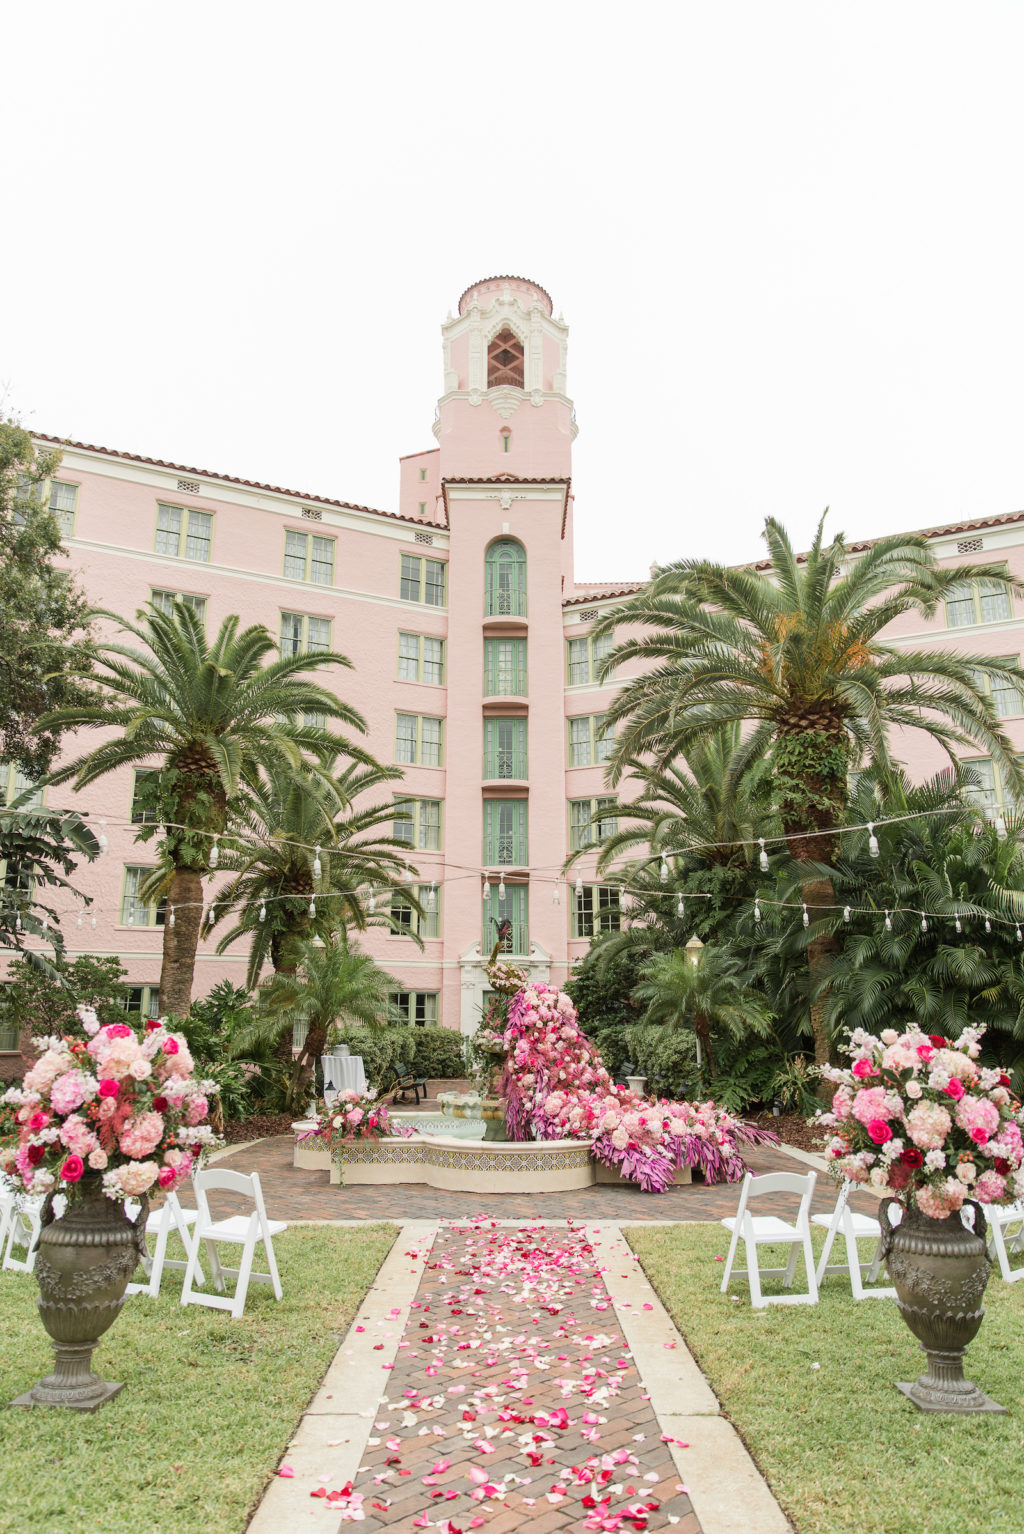 Elegant Garden Themed Wedding Ceremony Decor, Lush Pink and Purple Flowers in Water Fountain and Floral Arrangements, String Lights | St. Pete Wedding Venue The Vinoy Renaissance